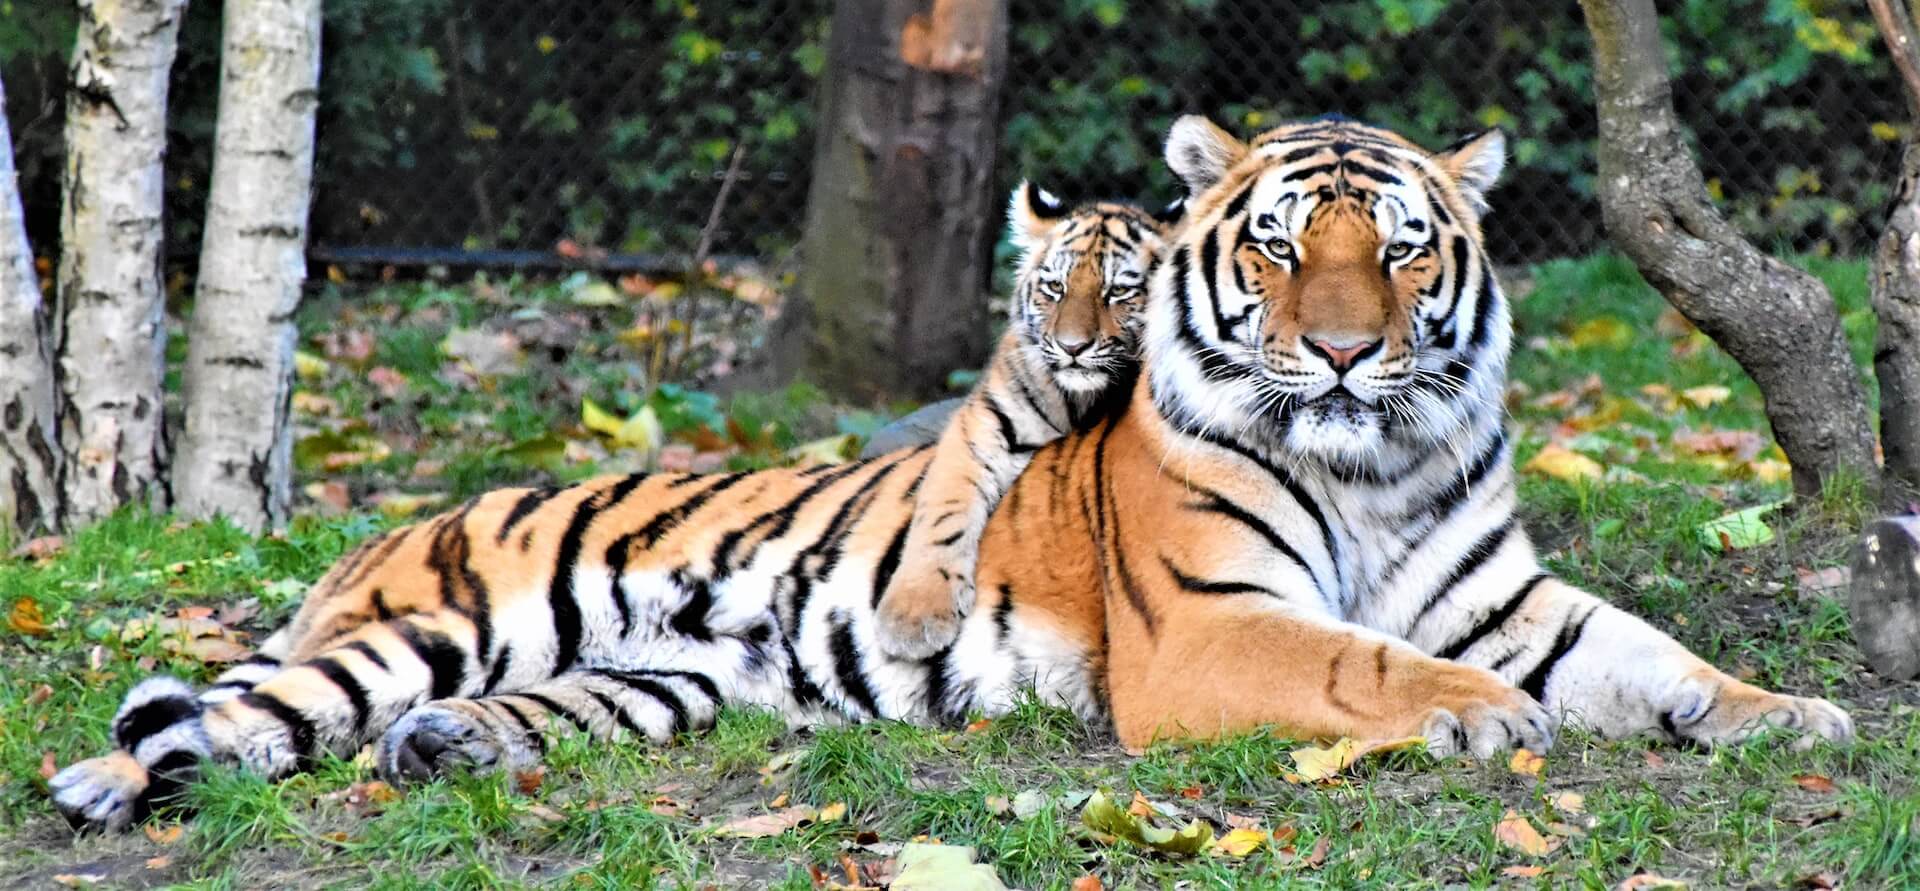 What is the golden tiger? Is it a new type of tiger? If so, how did it come  about? - Quora